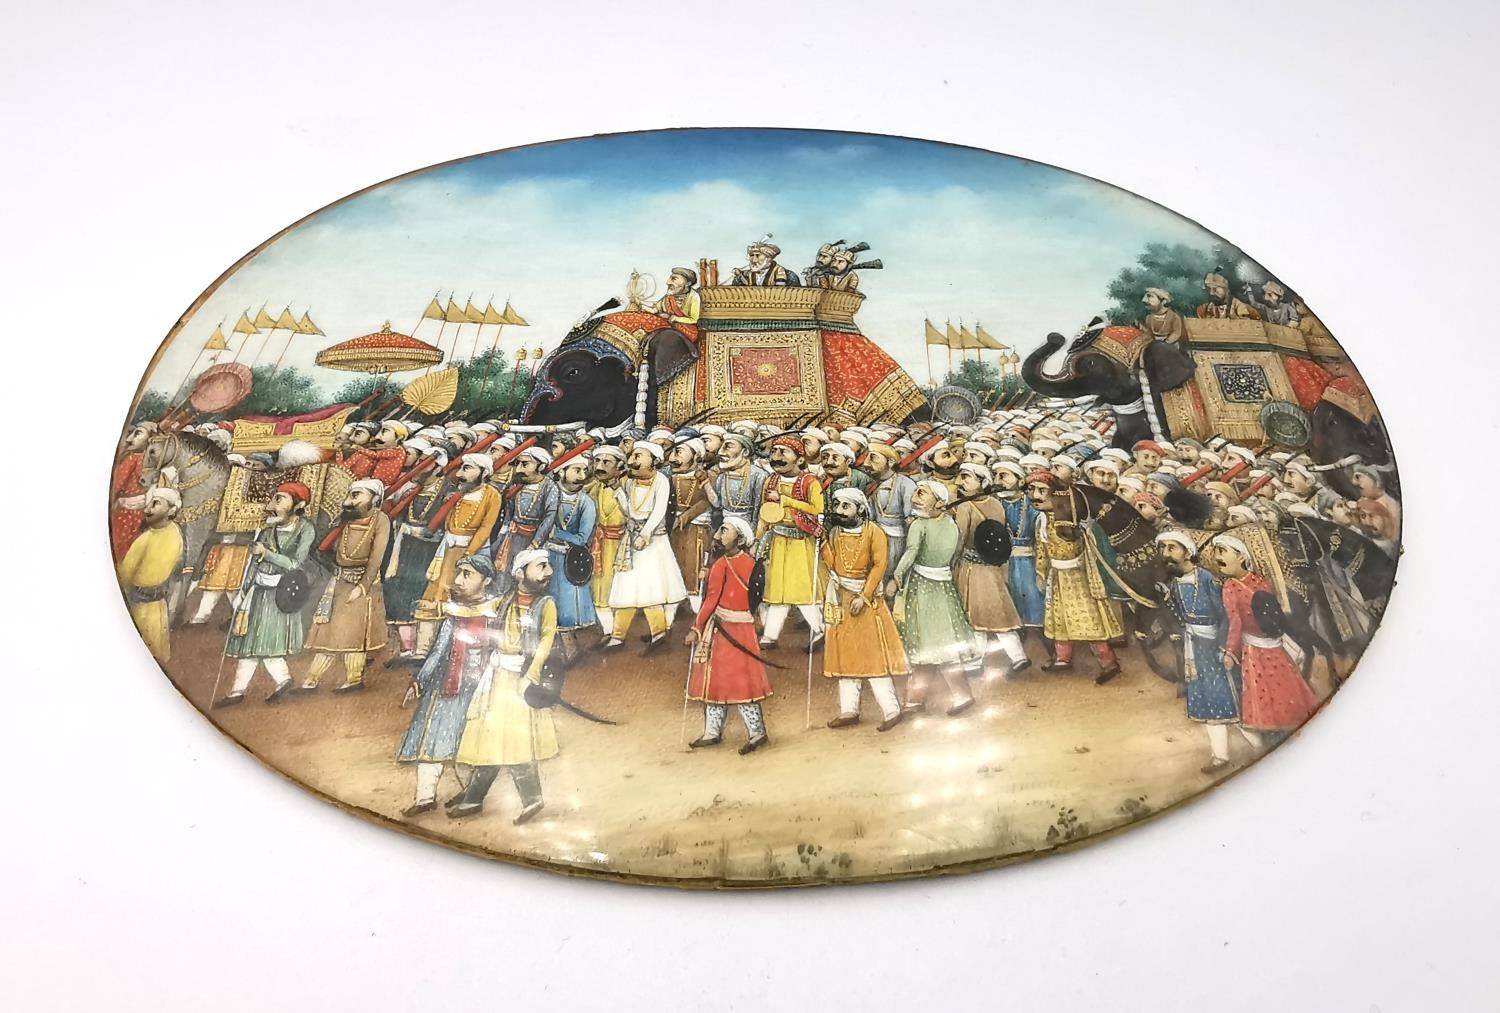 A 19th century Indian Mughal oval miniature on ivory of a royal procession, Akbar Shah II on